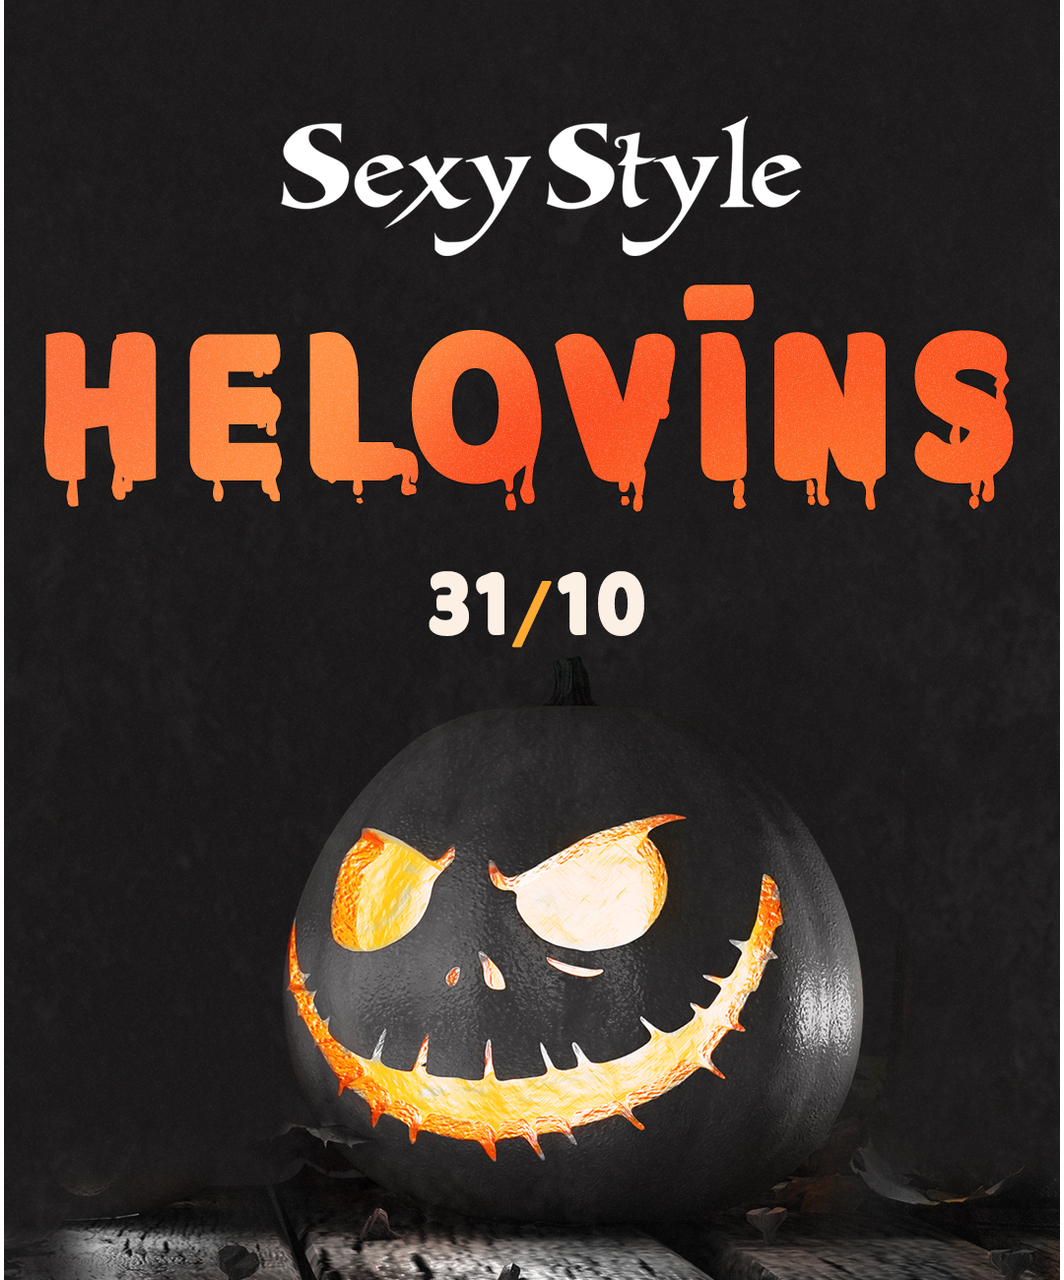 SexyStyle Halloween party